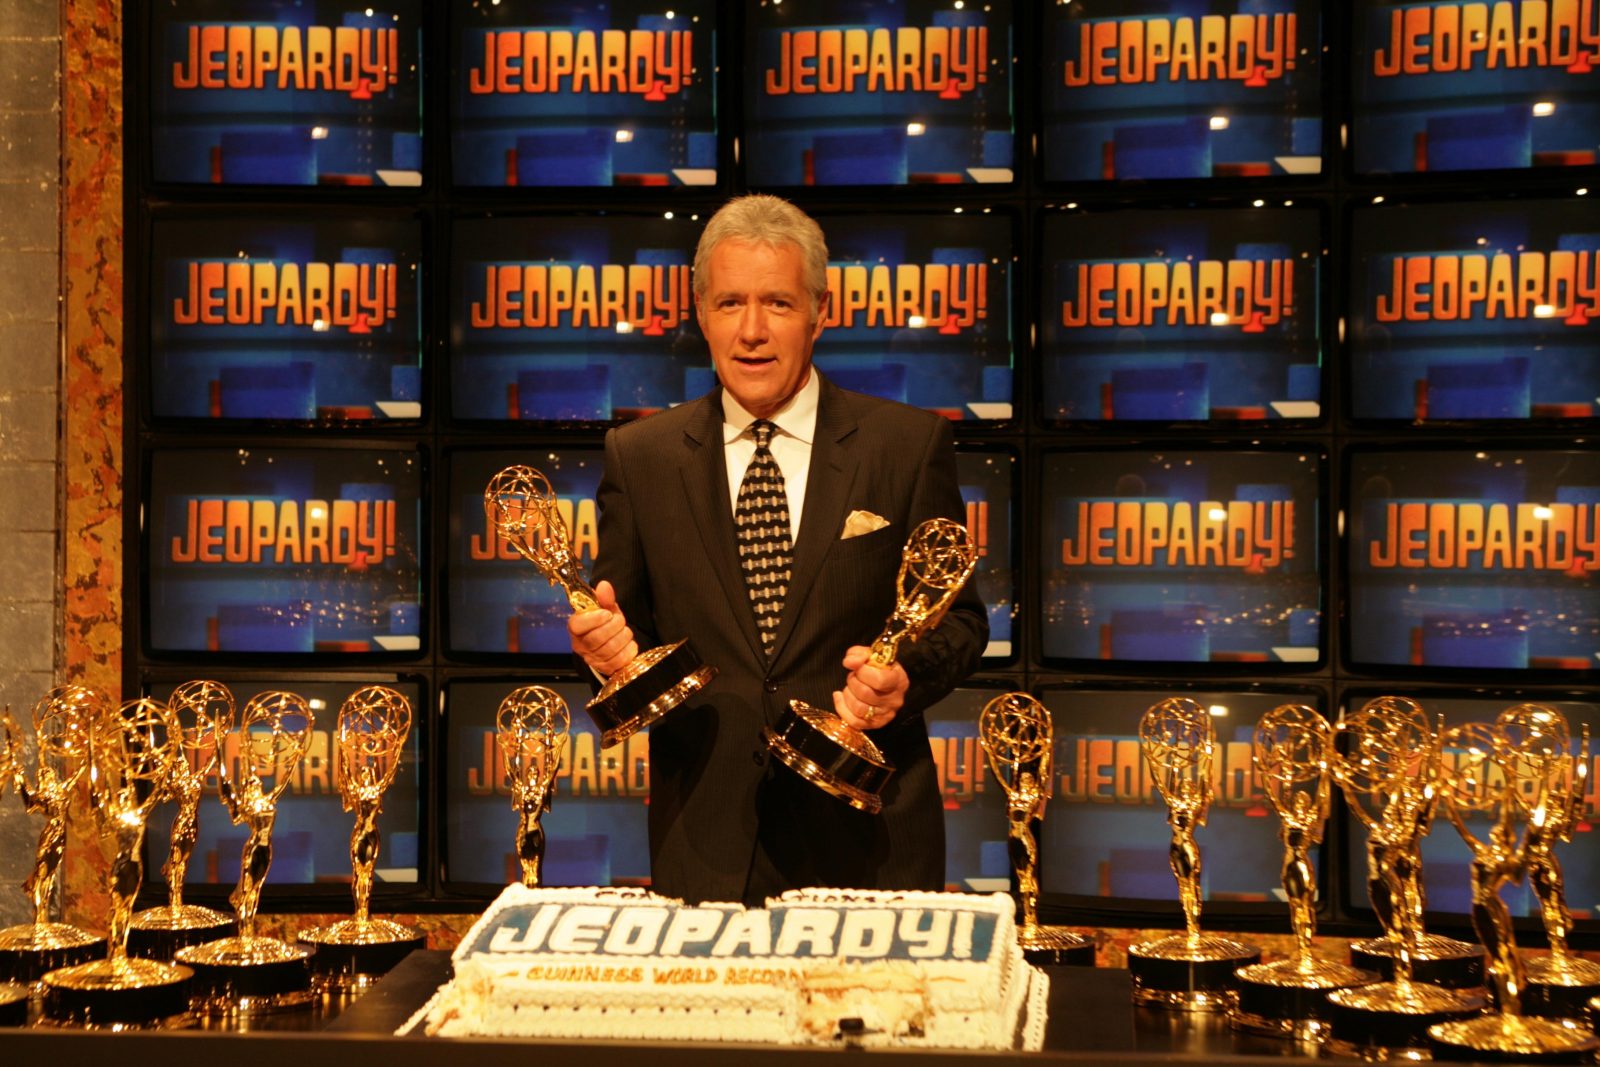 Alex Trebek at the ceremony entering Jeopardy in to the Guinness World Records for being the game show with the most Emmy Awards. Sony Studios, Culver City, CA. 11-01-05